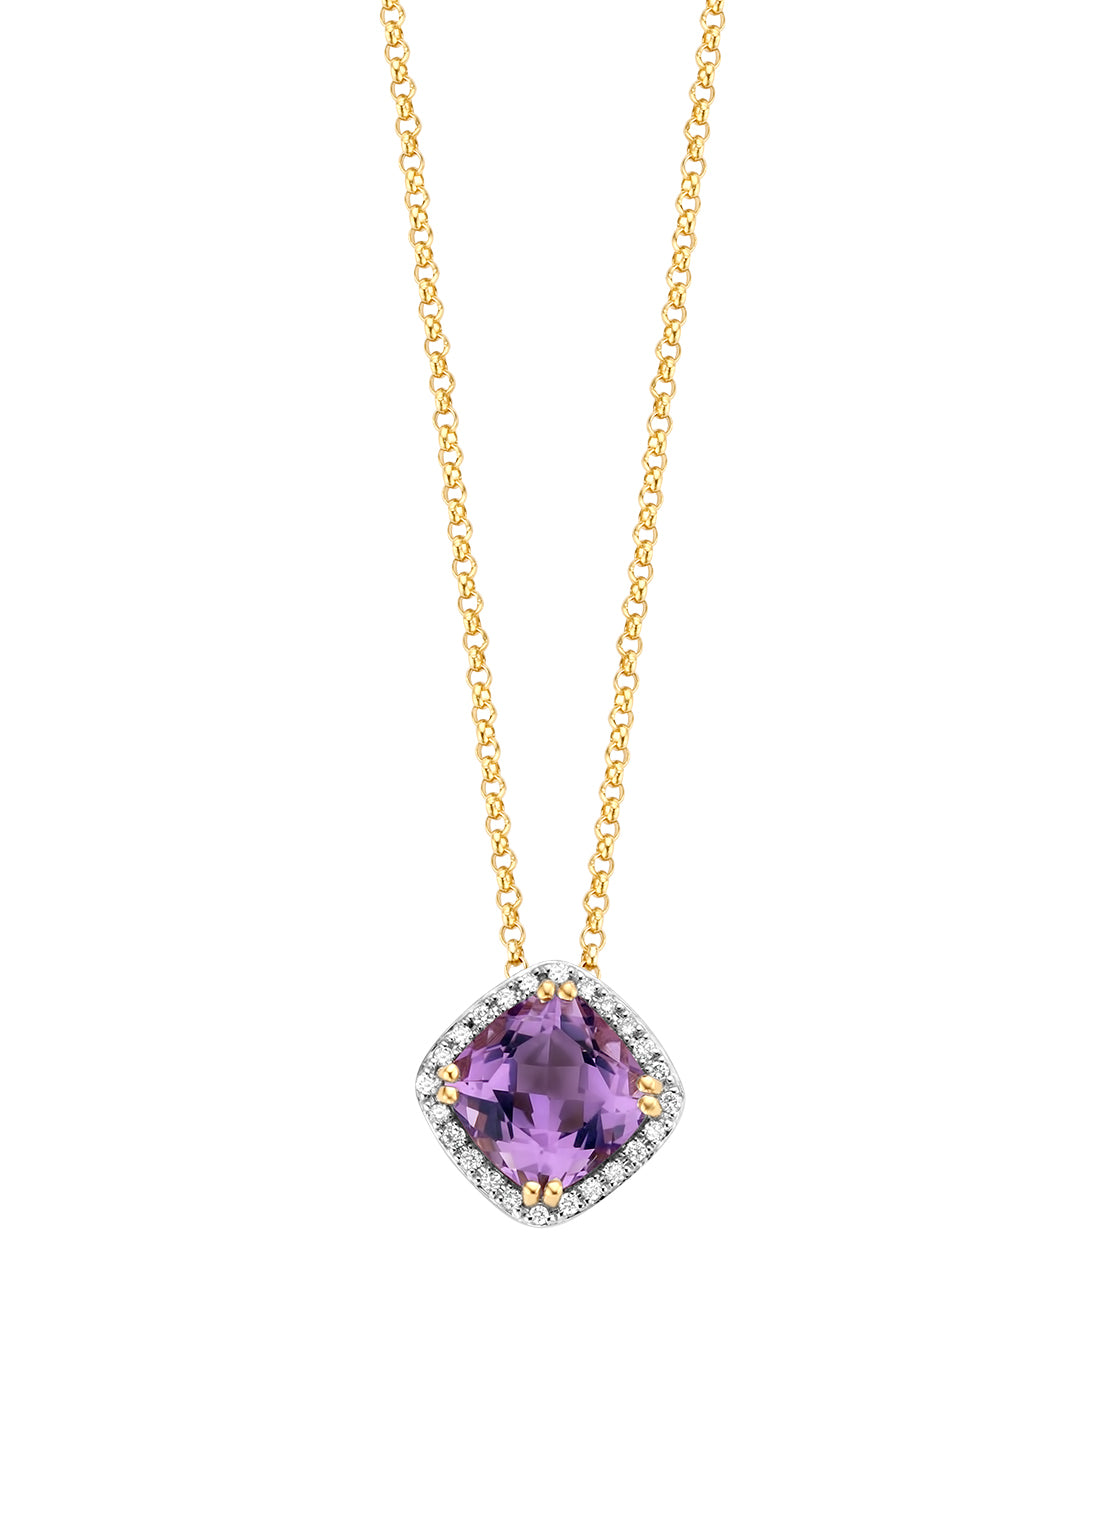 Yellow gold pendant with necklace, 1.54 ct Purple Amethist, Fiësta